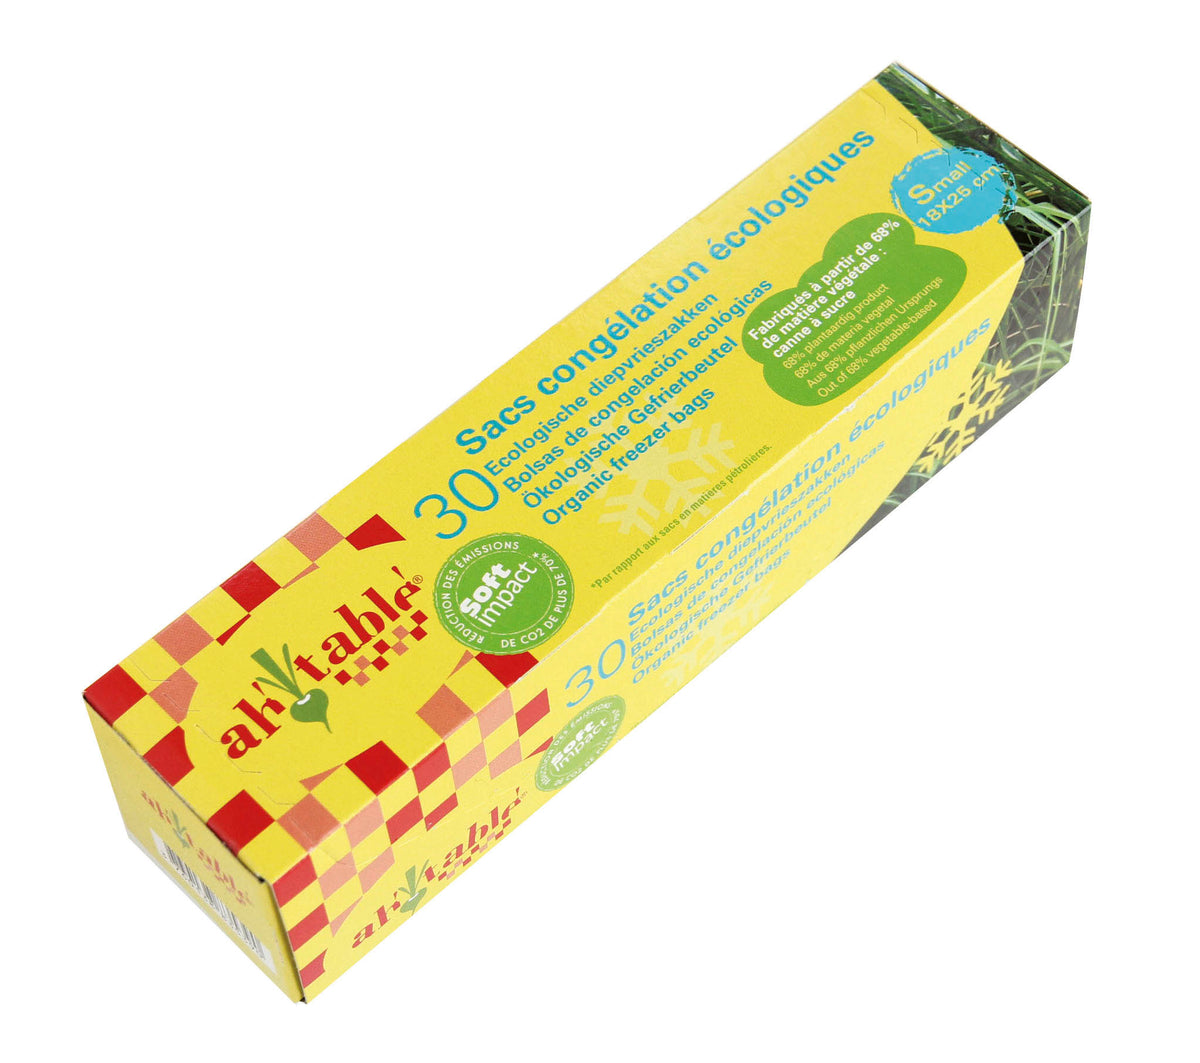 Eco Freezer Bags (Medium) | Food Alive | Raw Living UK | House &amp; Home | 30 Medium Eco Freezer bags made from polyethylene from sugar cane ethanol produced in Brazil. Supplied with twist ties. 68% Vegetable material.